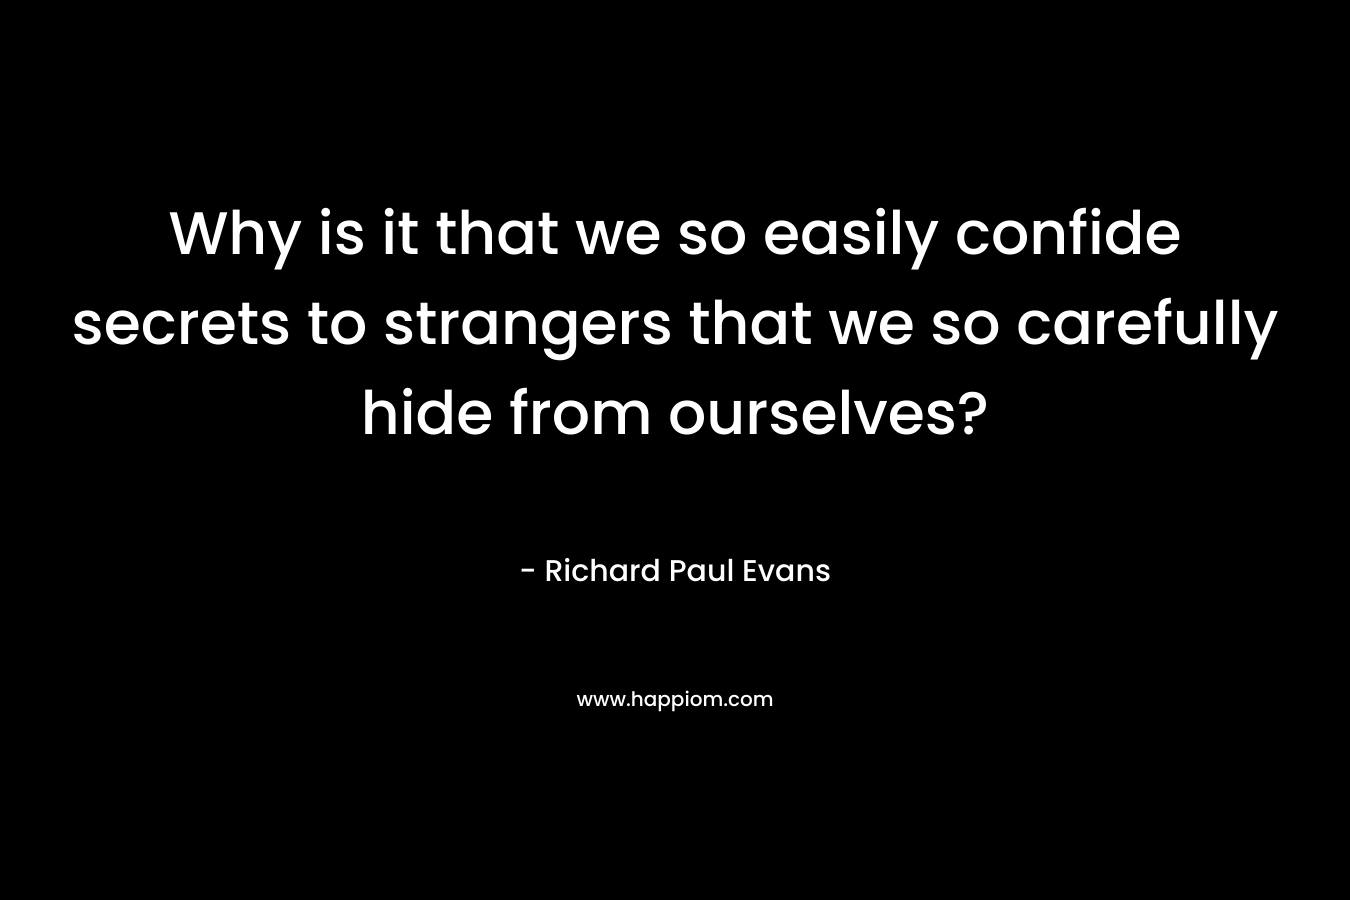 Why is it that we so easily confide secrets to strangers that we so carefully hide from ourselves?